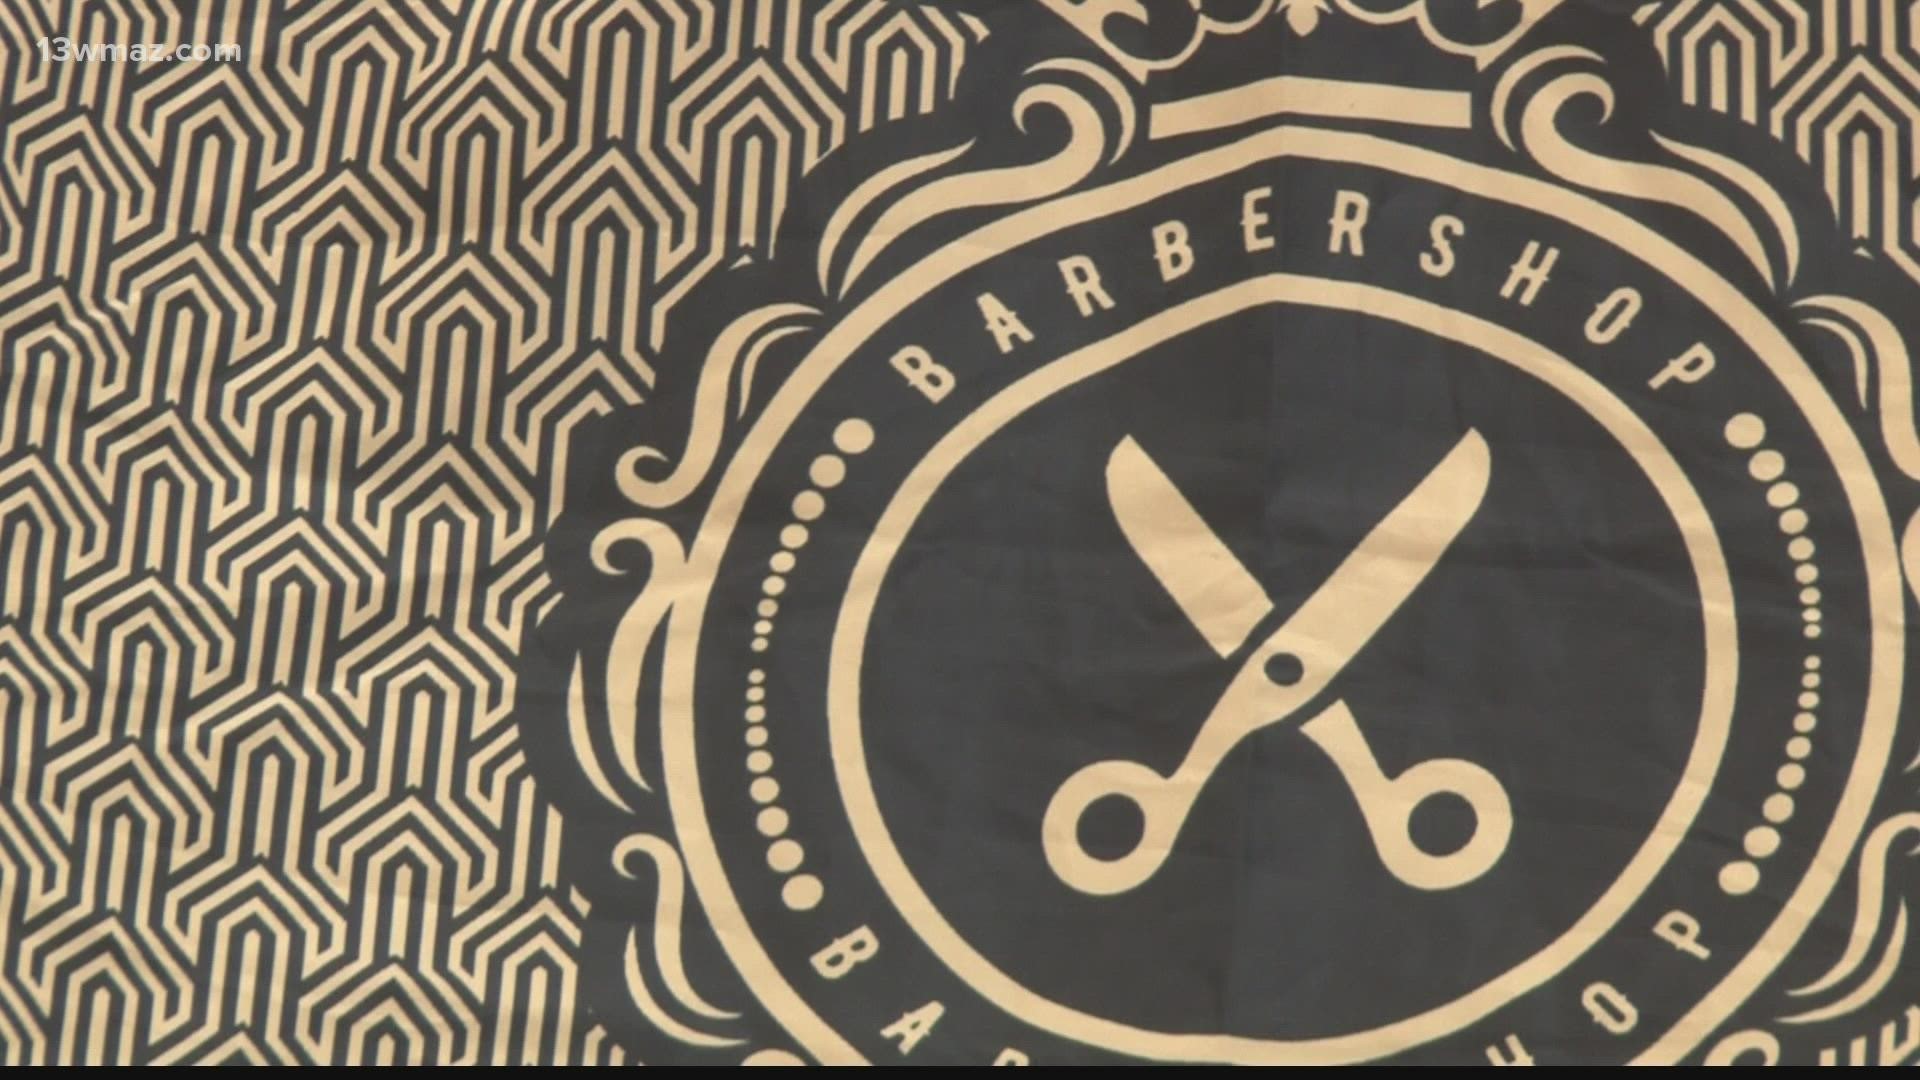 Next year, they plan on opening a place for students to get a haircut right on campus.